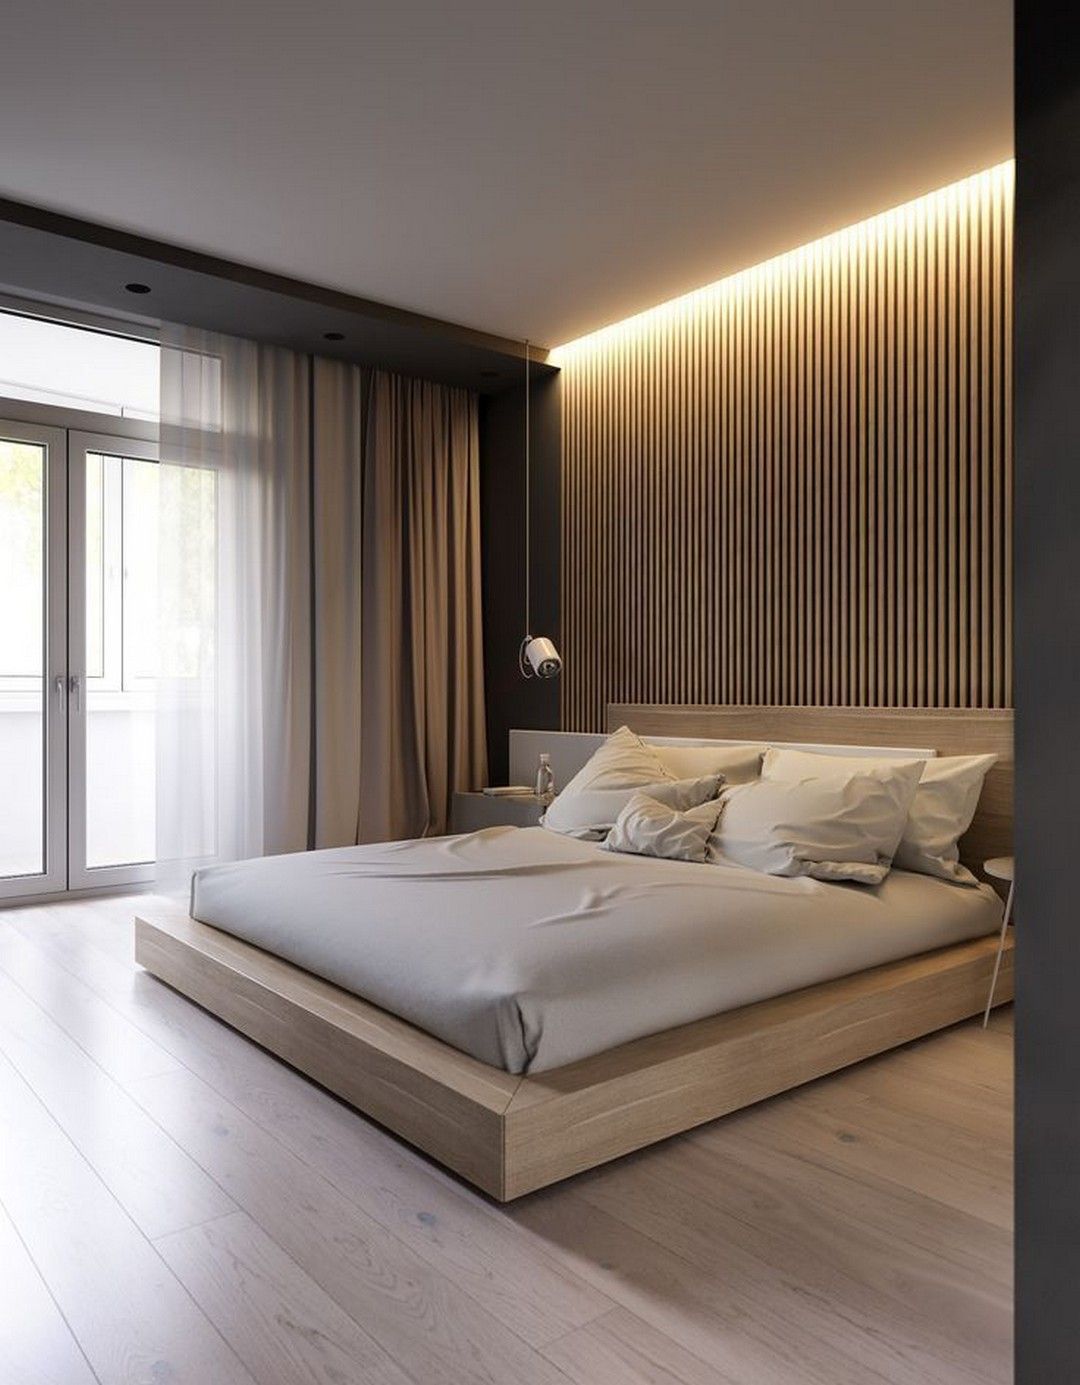 Sleek And Modern: Contemporary Bedroom Ceiling Designs For Minimalist Flair